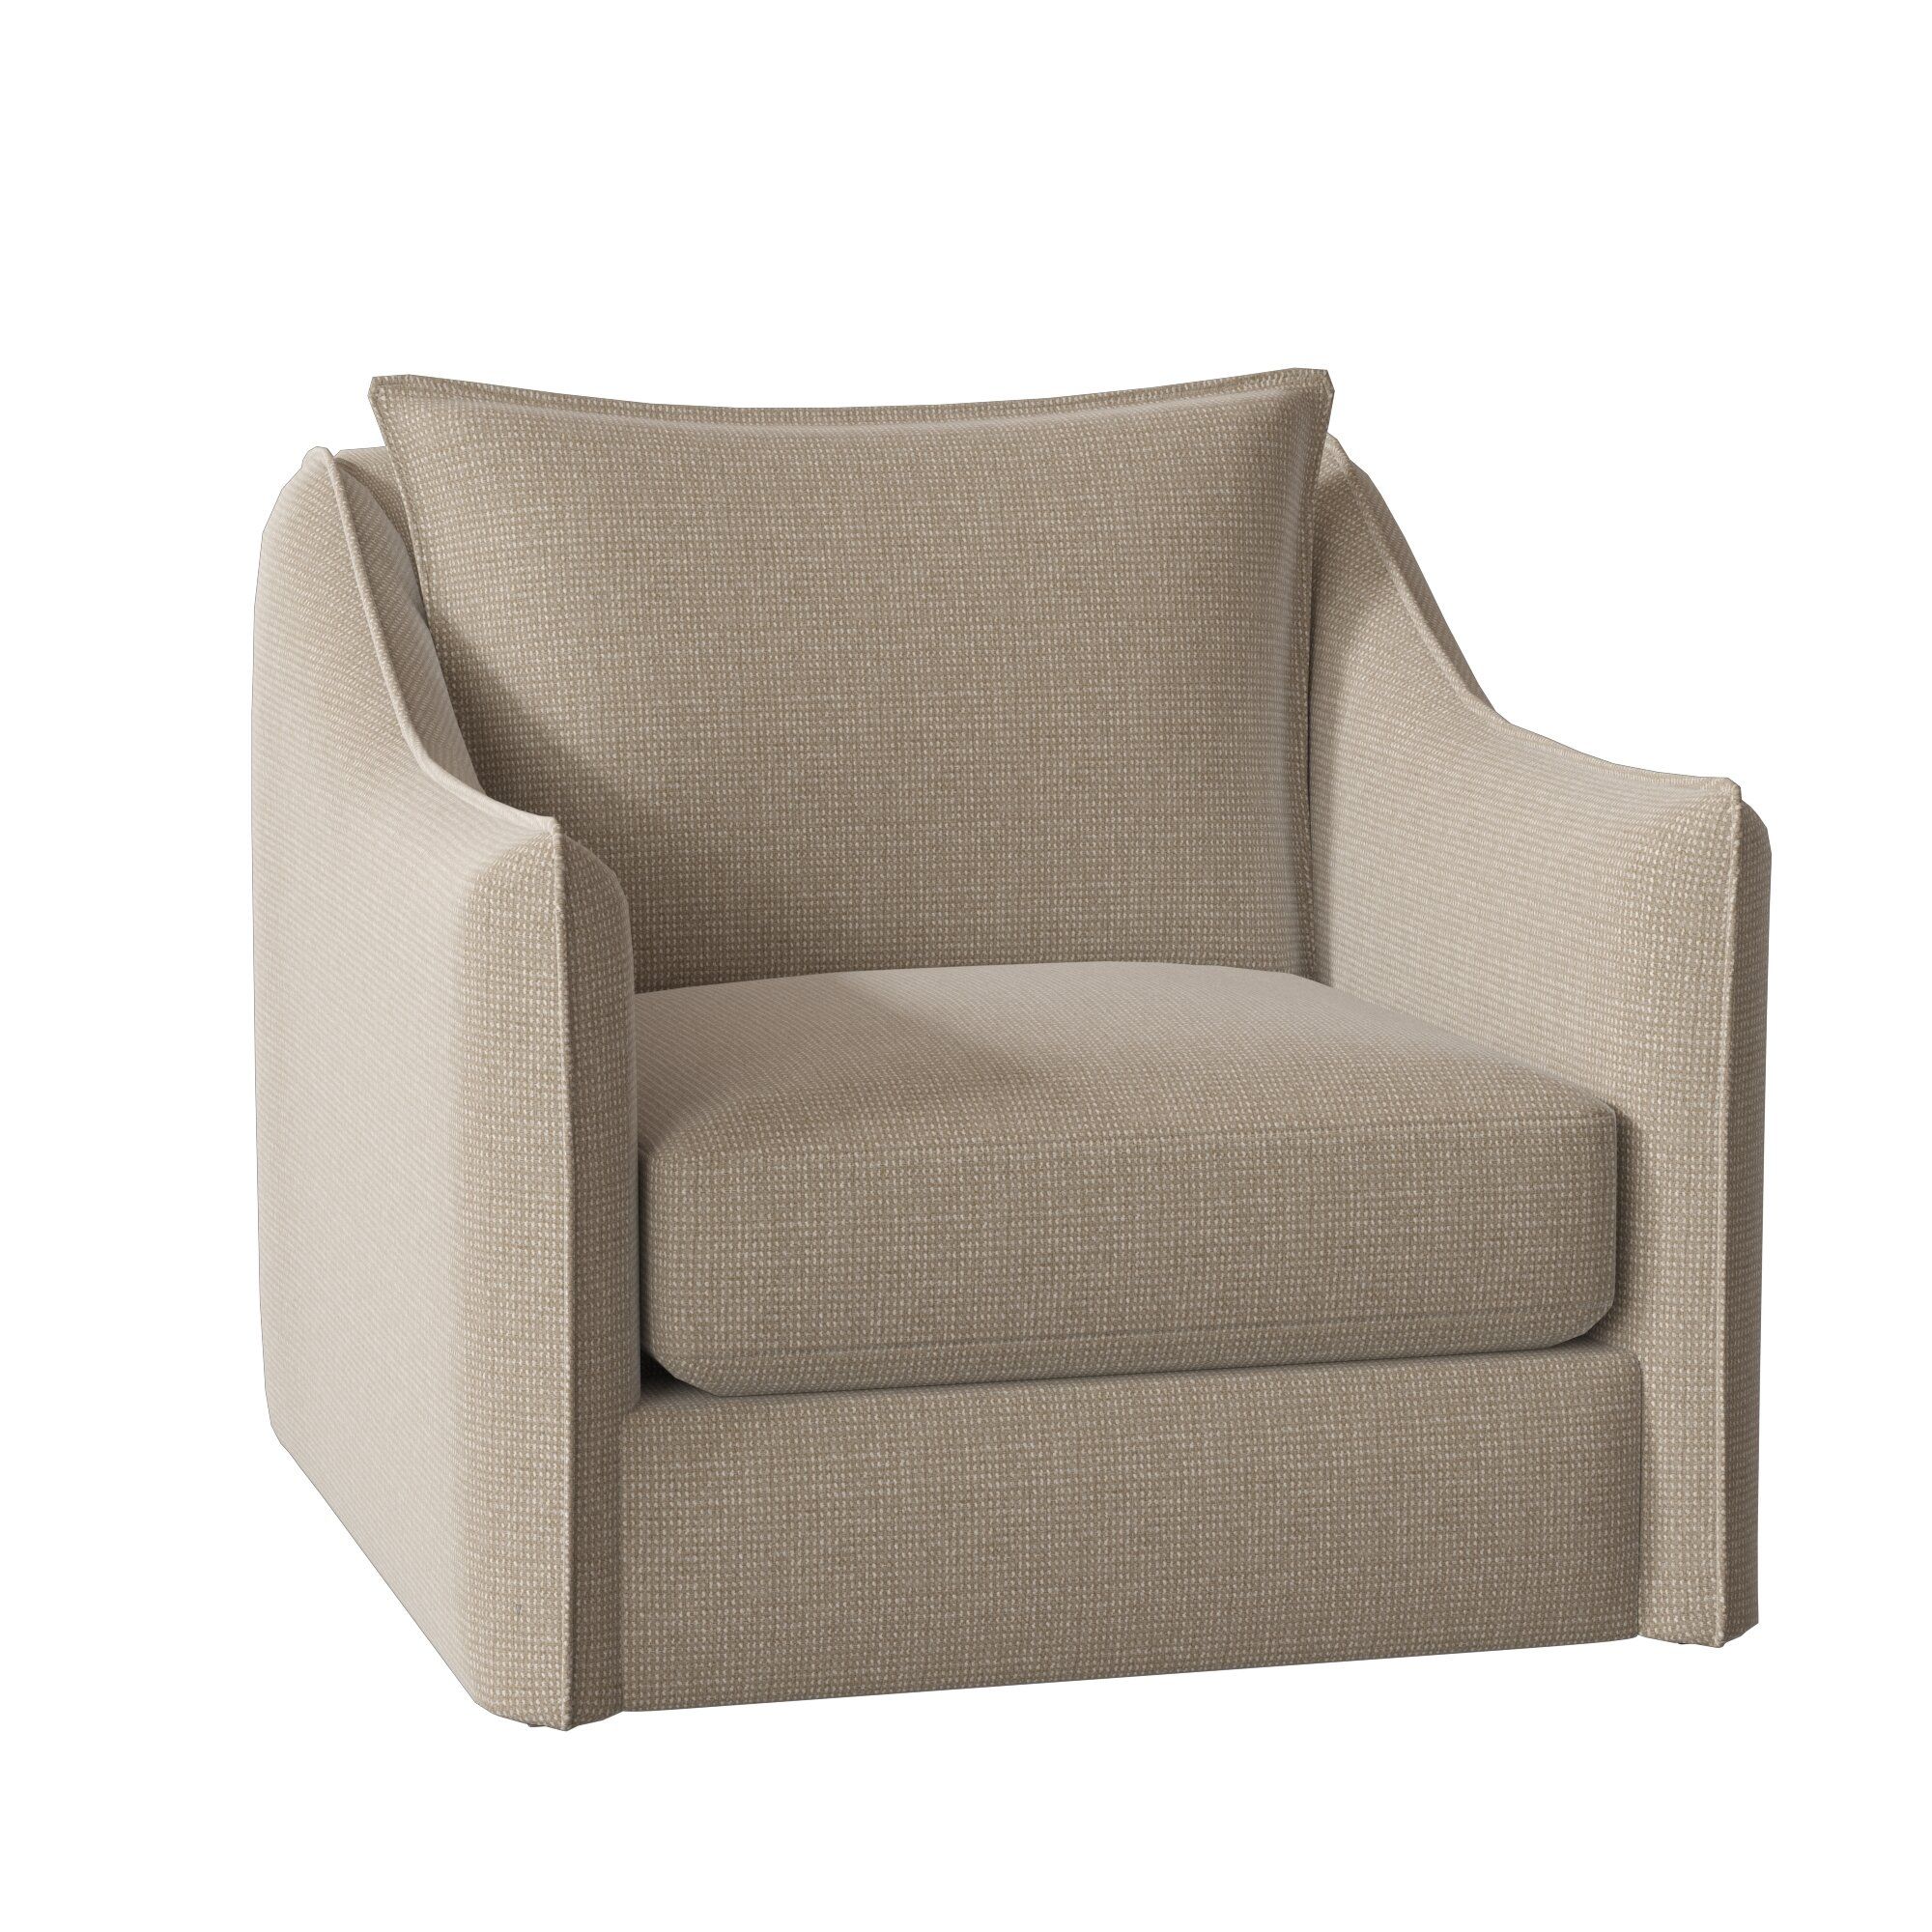 Navy Swivel Accent Chairs You'Ll Love In 2021 | Wayfair With Loftus Swivel Armchairs (View 6 of 15)